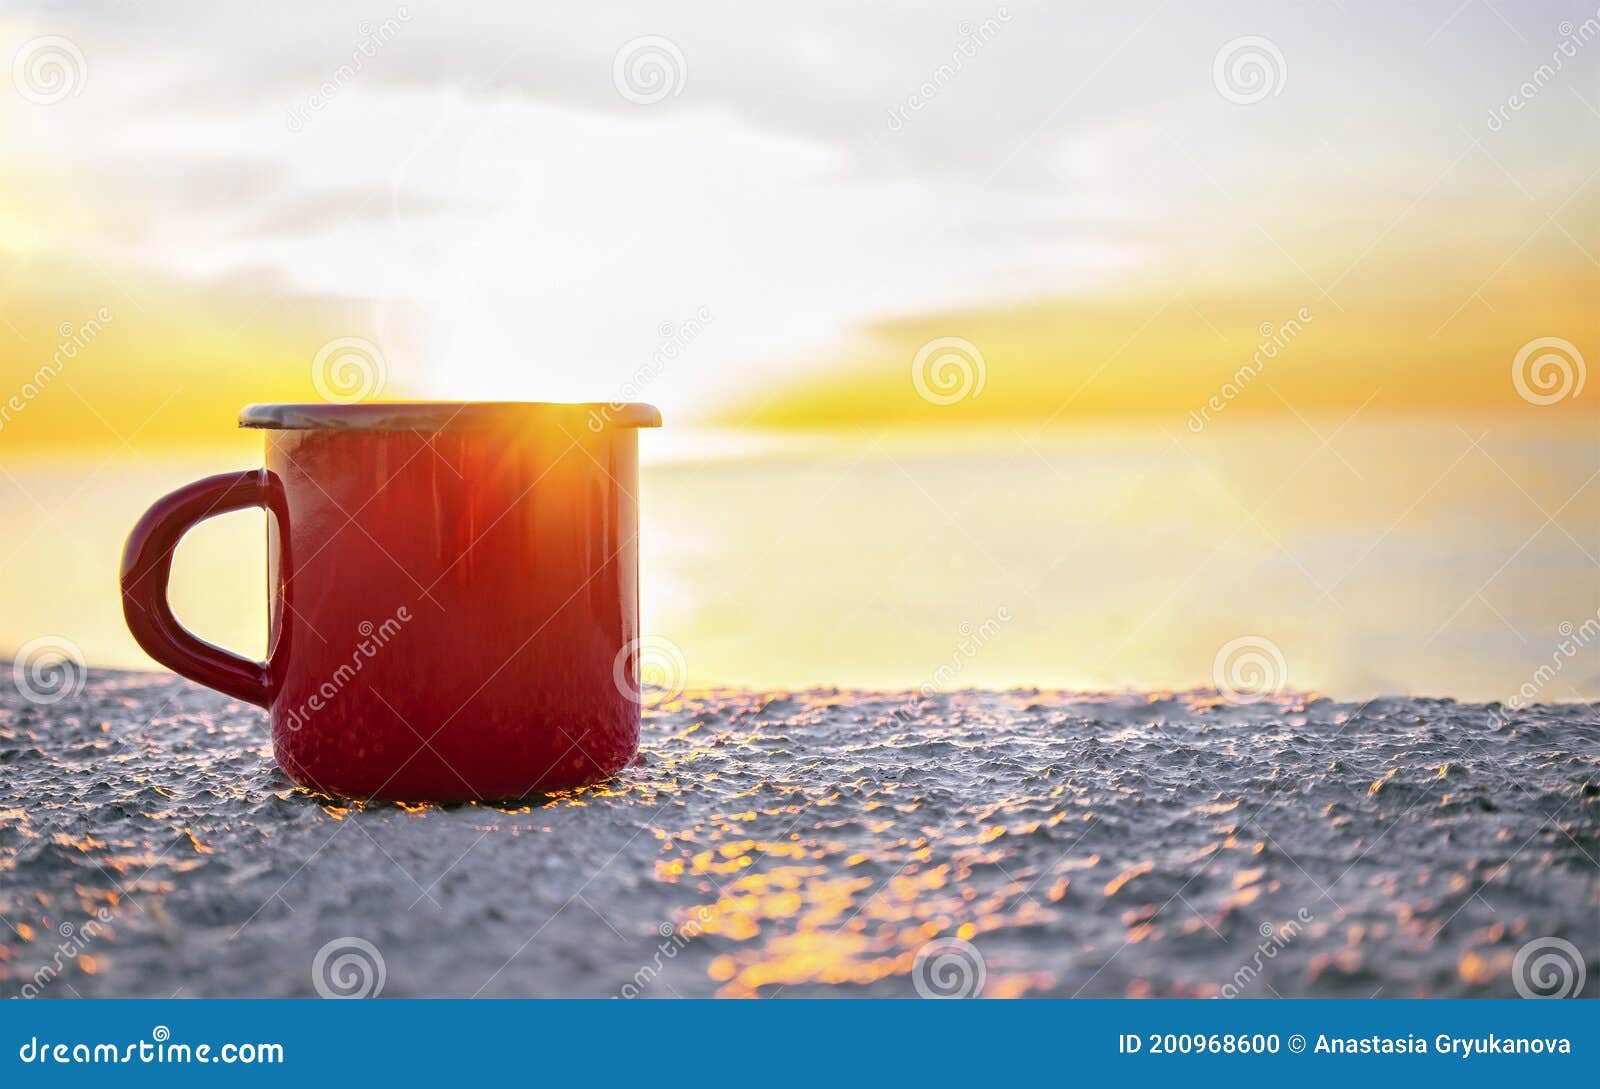 Good Morning Sunrise Concept. Red Mug with Tea or Coffee on the ...